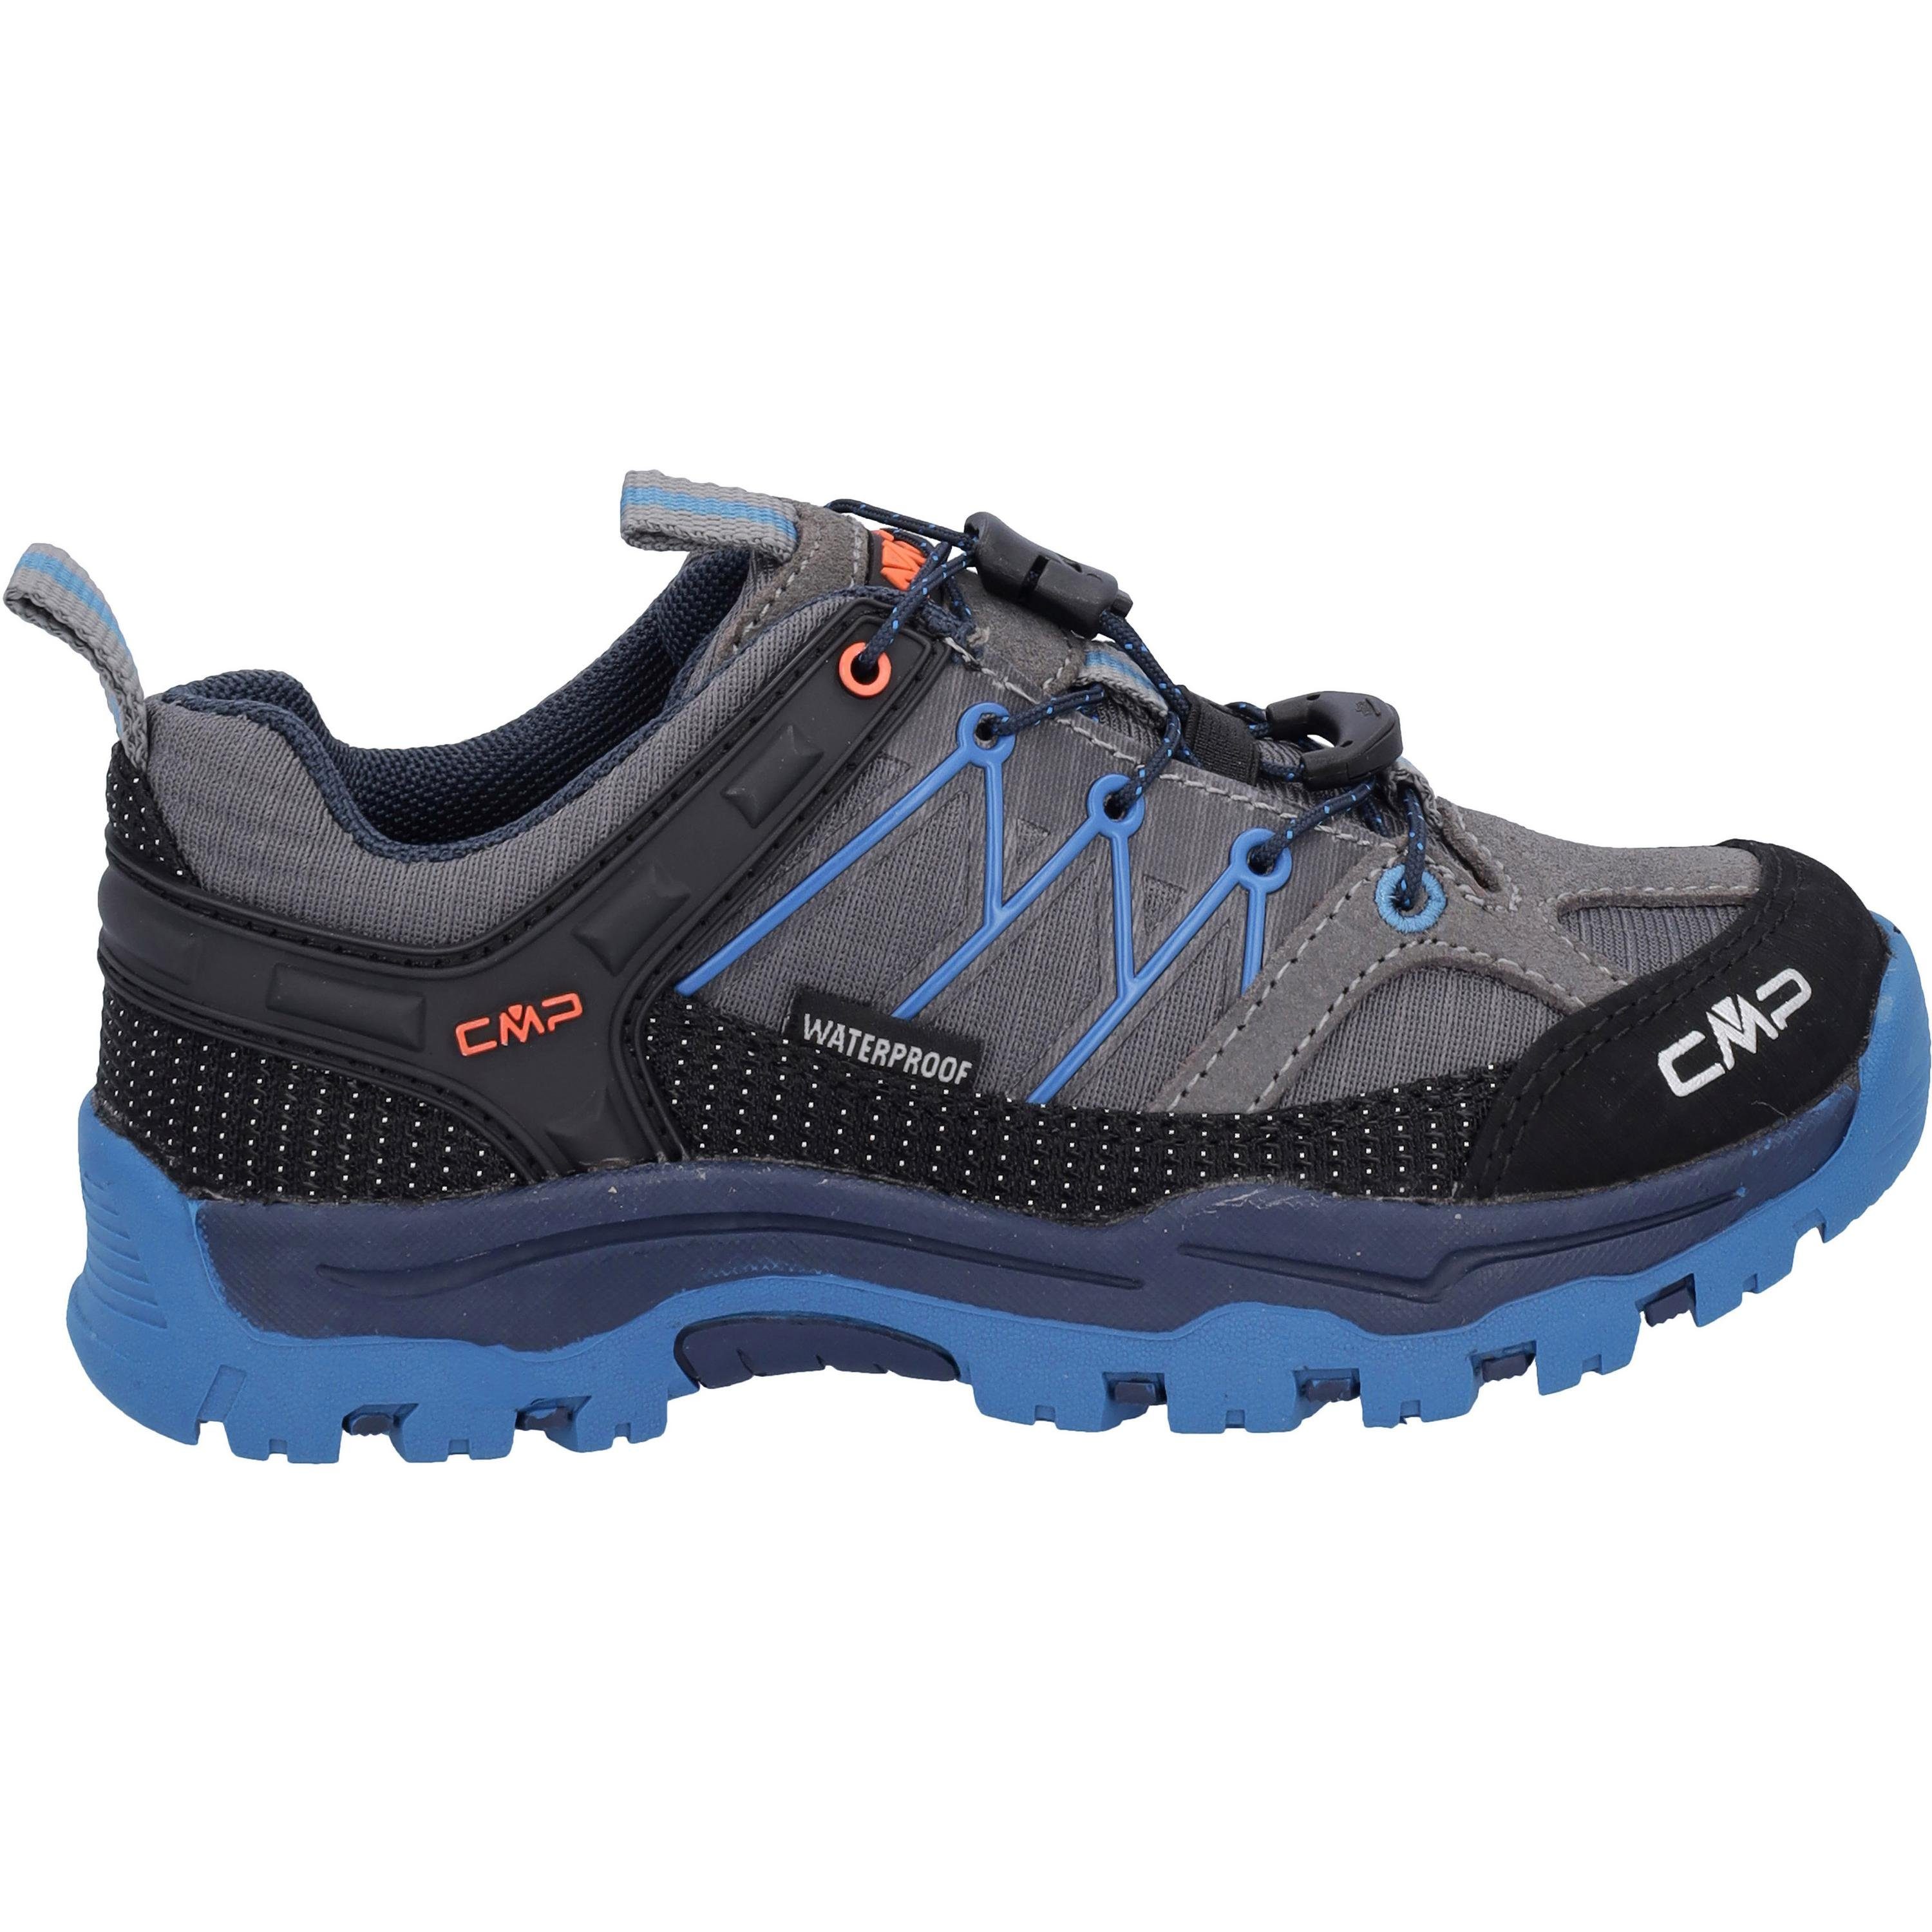 CMP Rigel Outdoorschuh WP Low graffite-oltremare